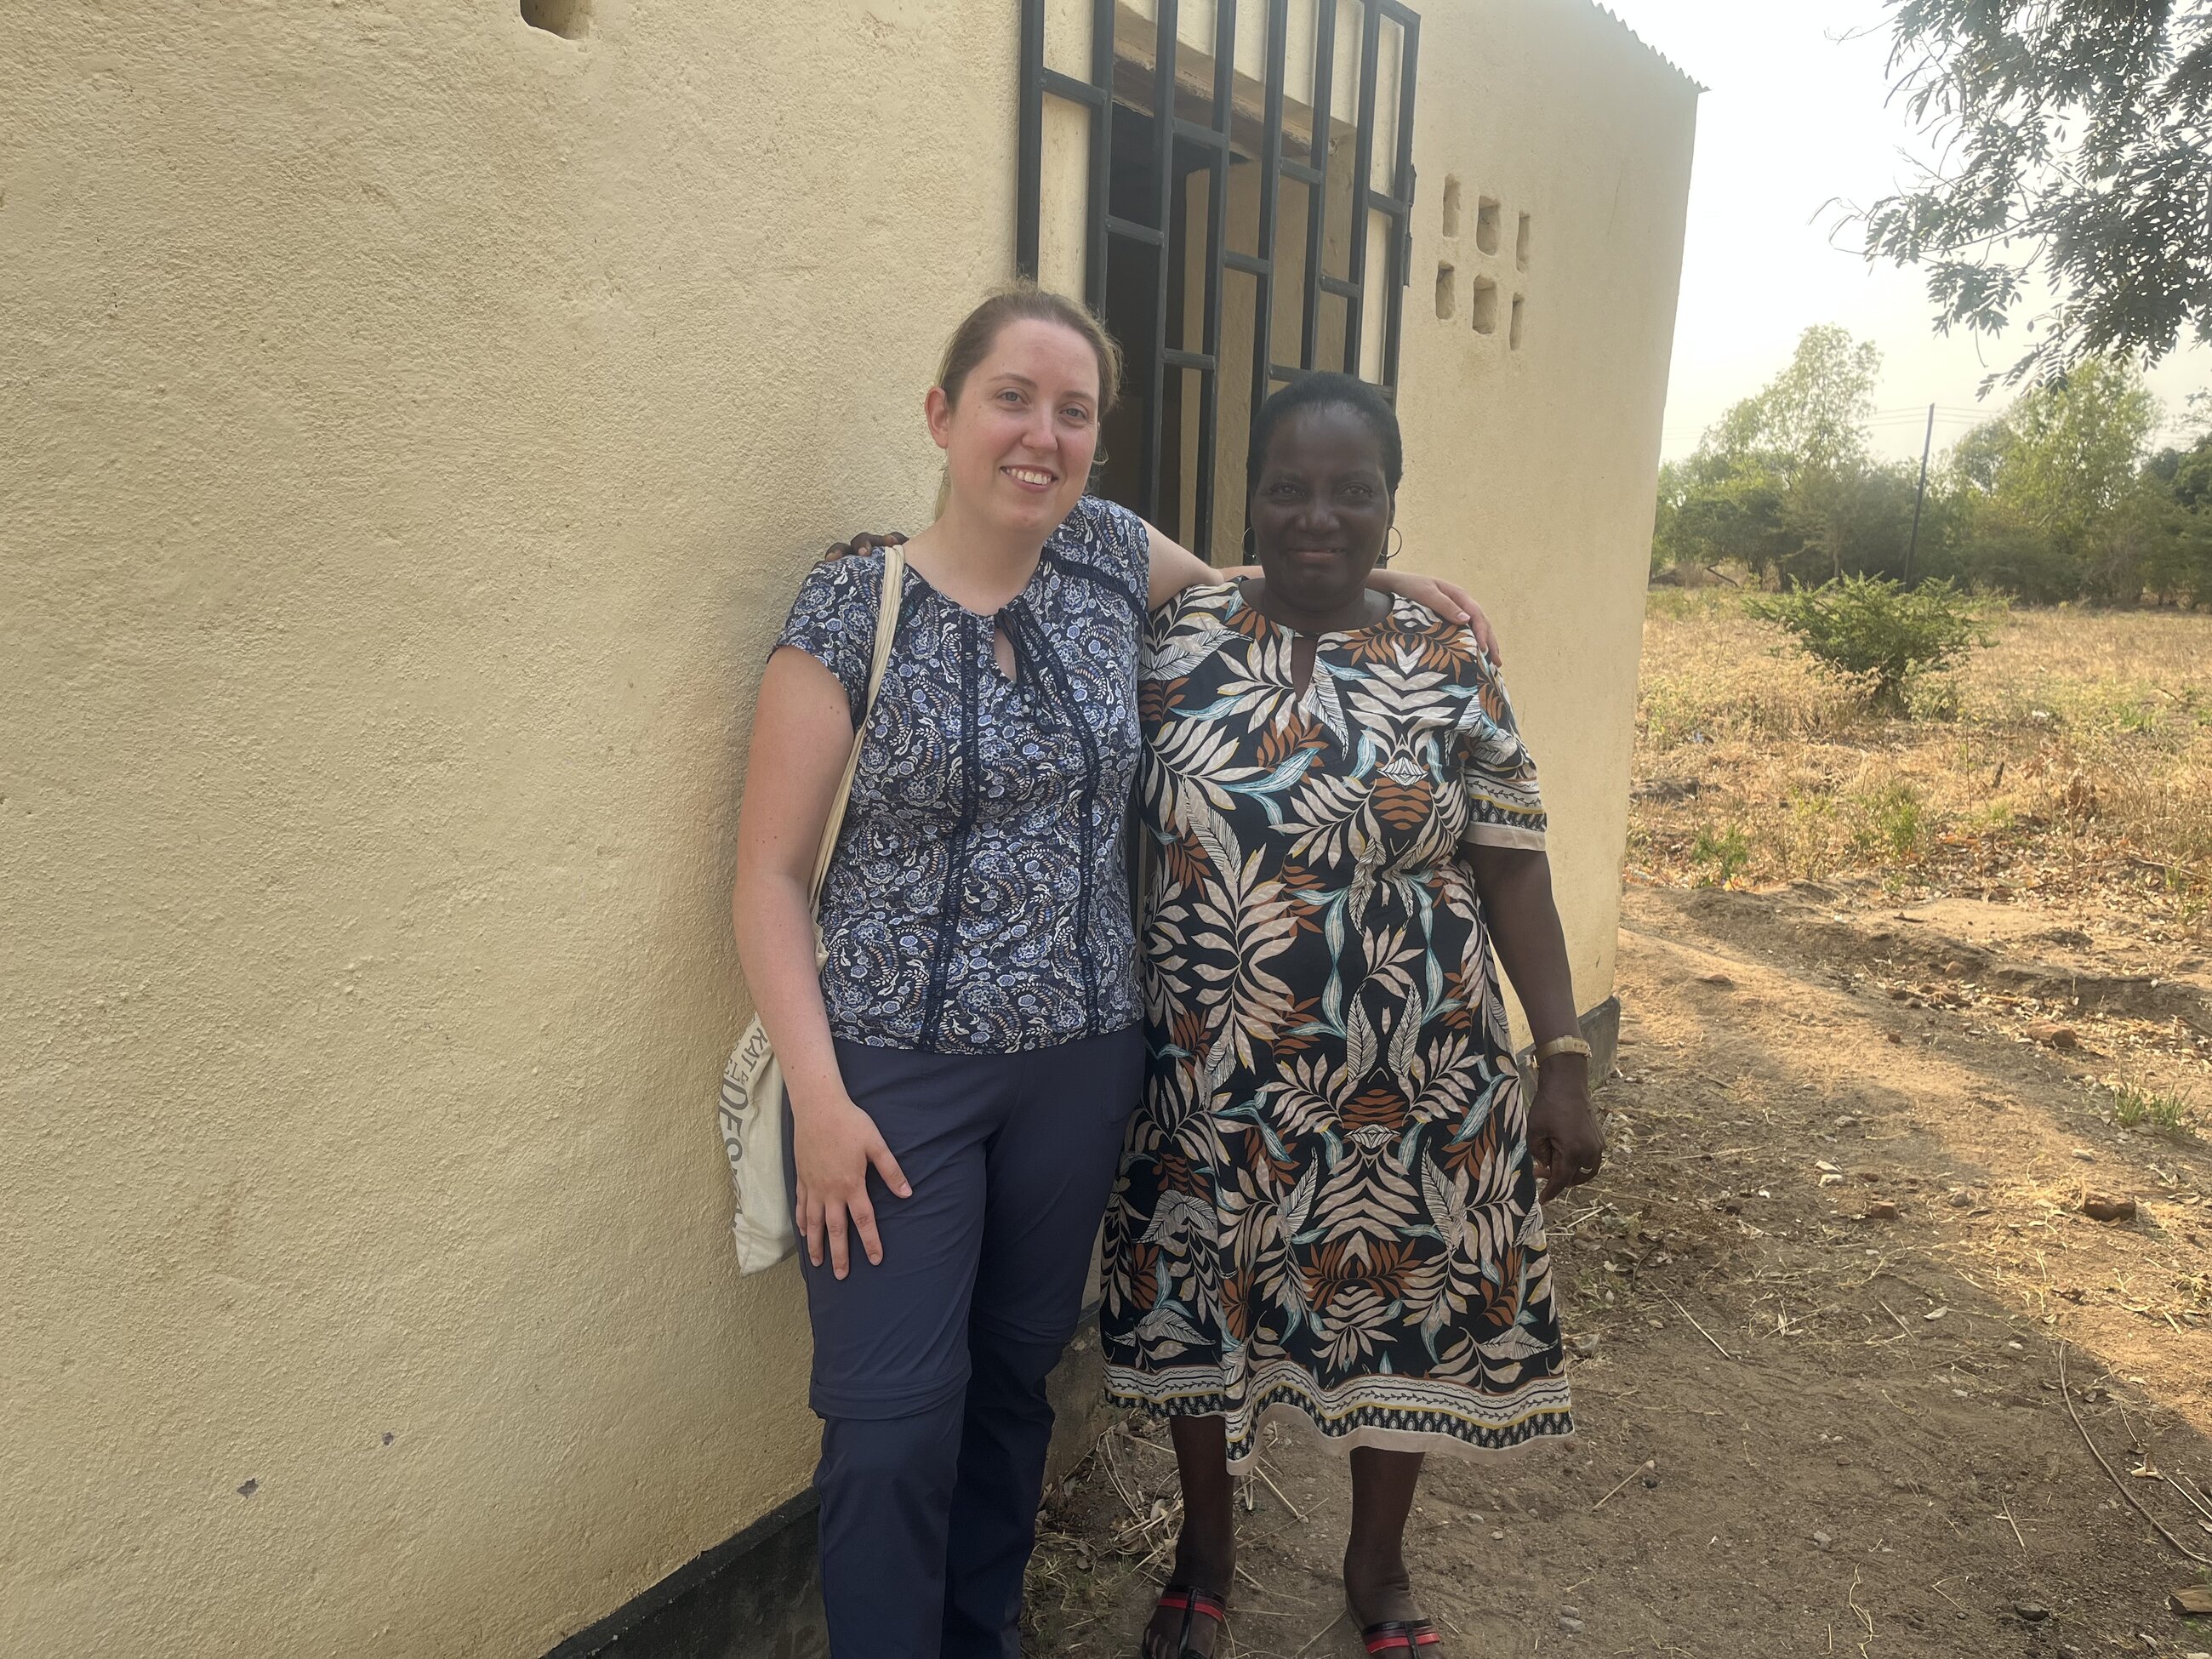 Gertrude the head teacher of Mwenilondo Primary School and me in front of the change room for girls